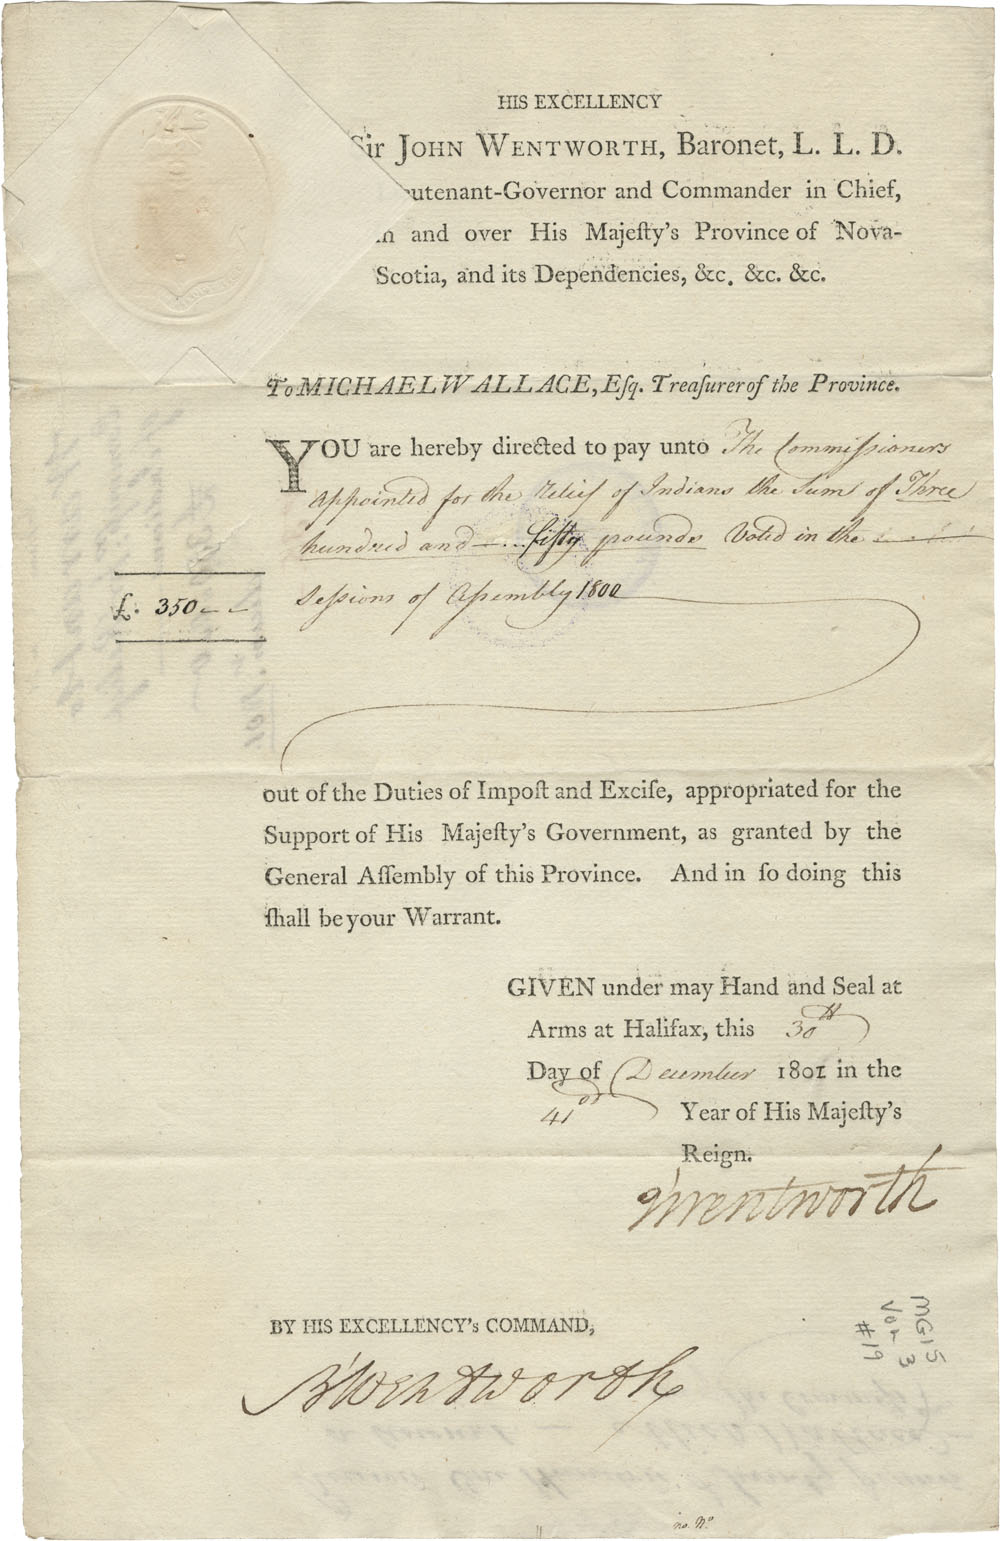 Sir John Wentworth's order to Michael Wallace to pay the Commissioners appointed for the relief of the Mi'kmaq, £350. 